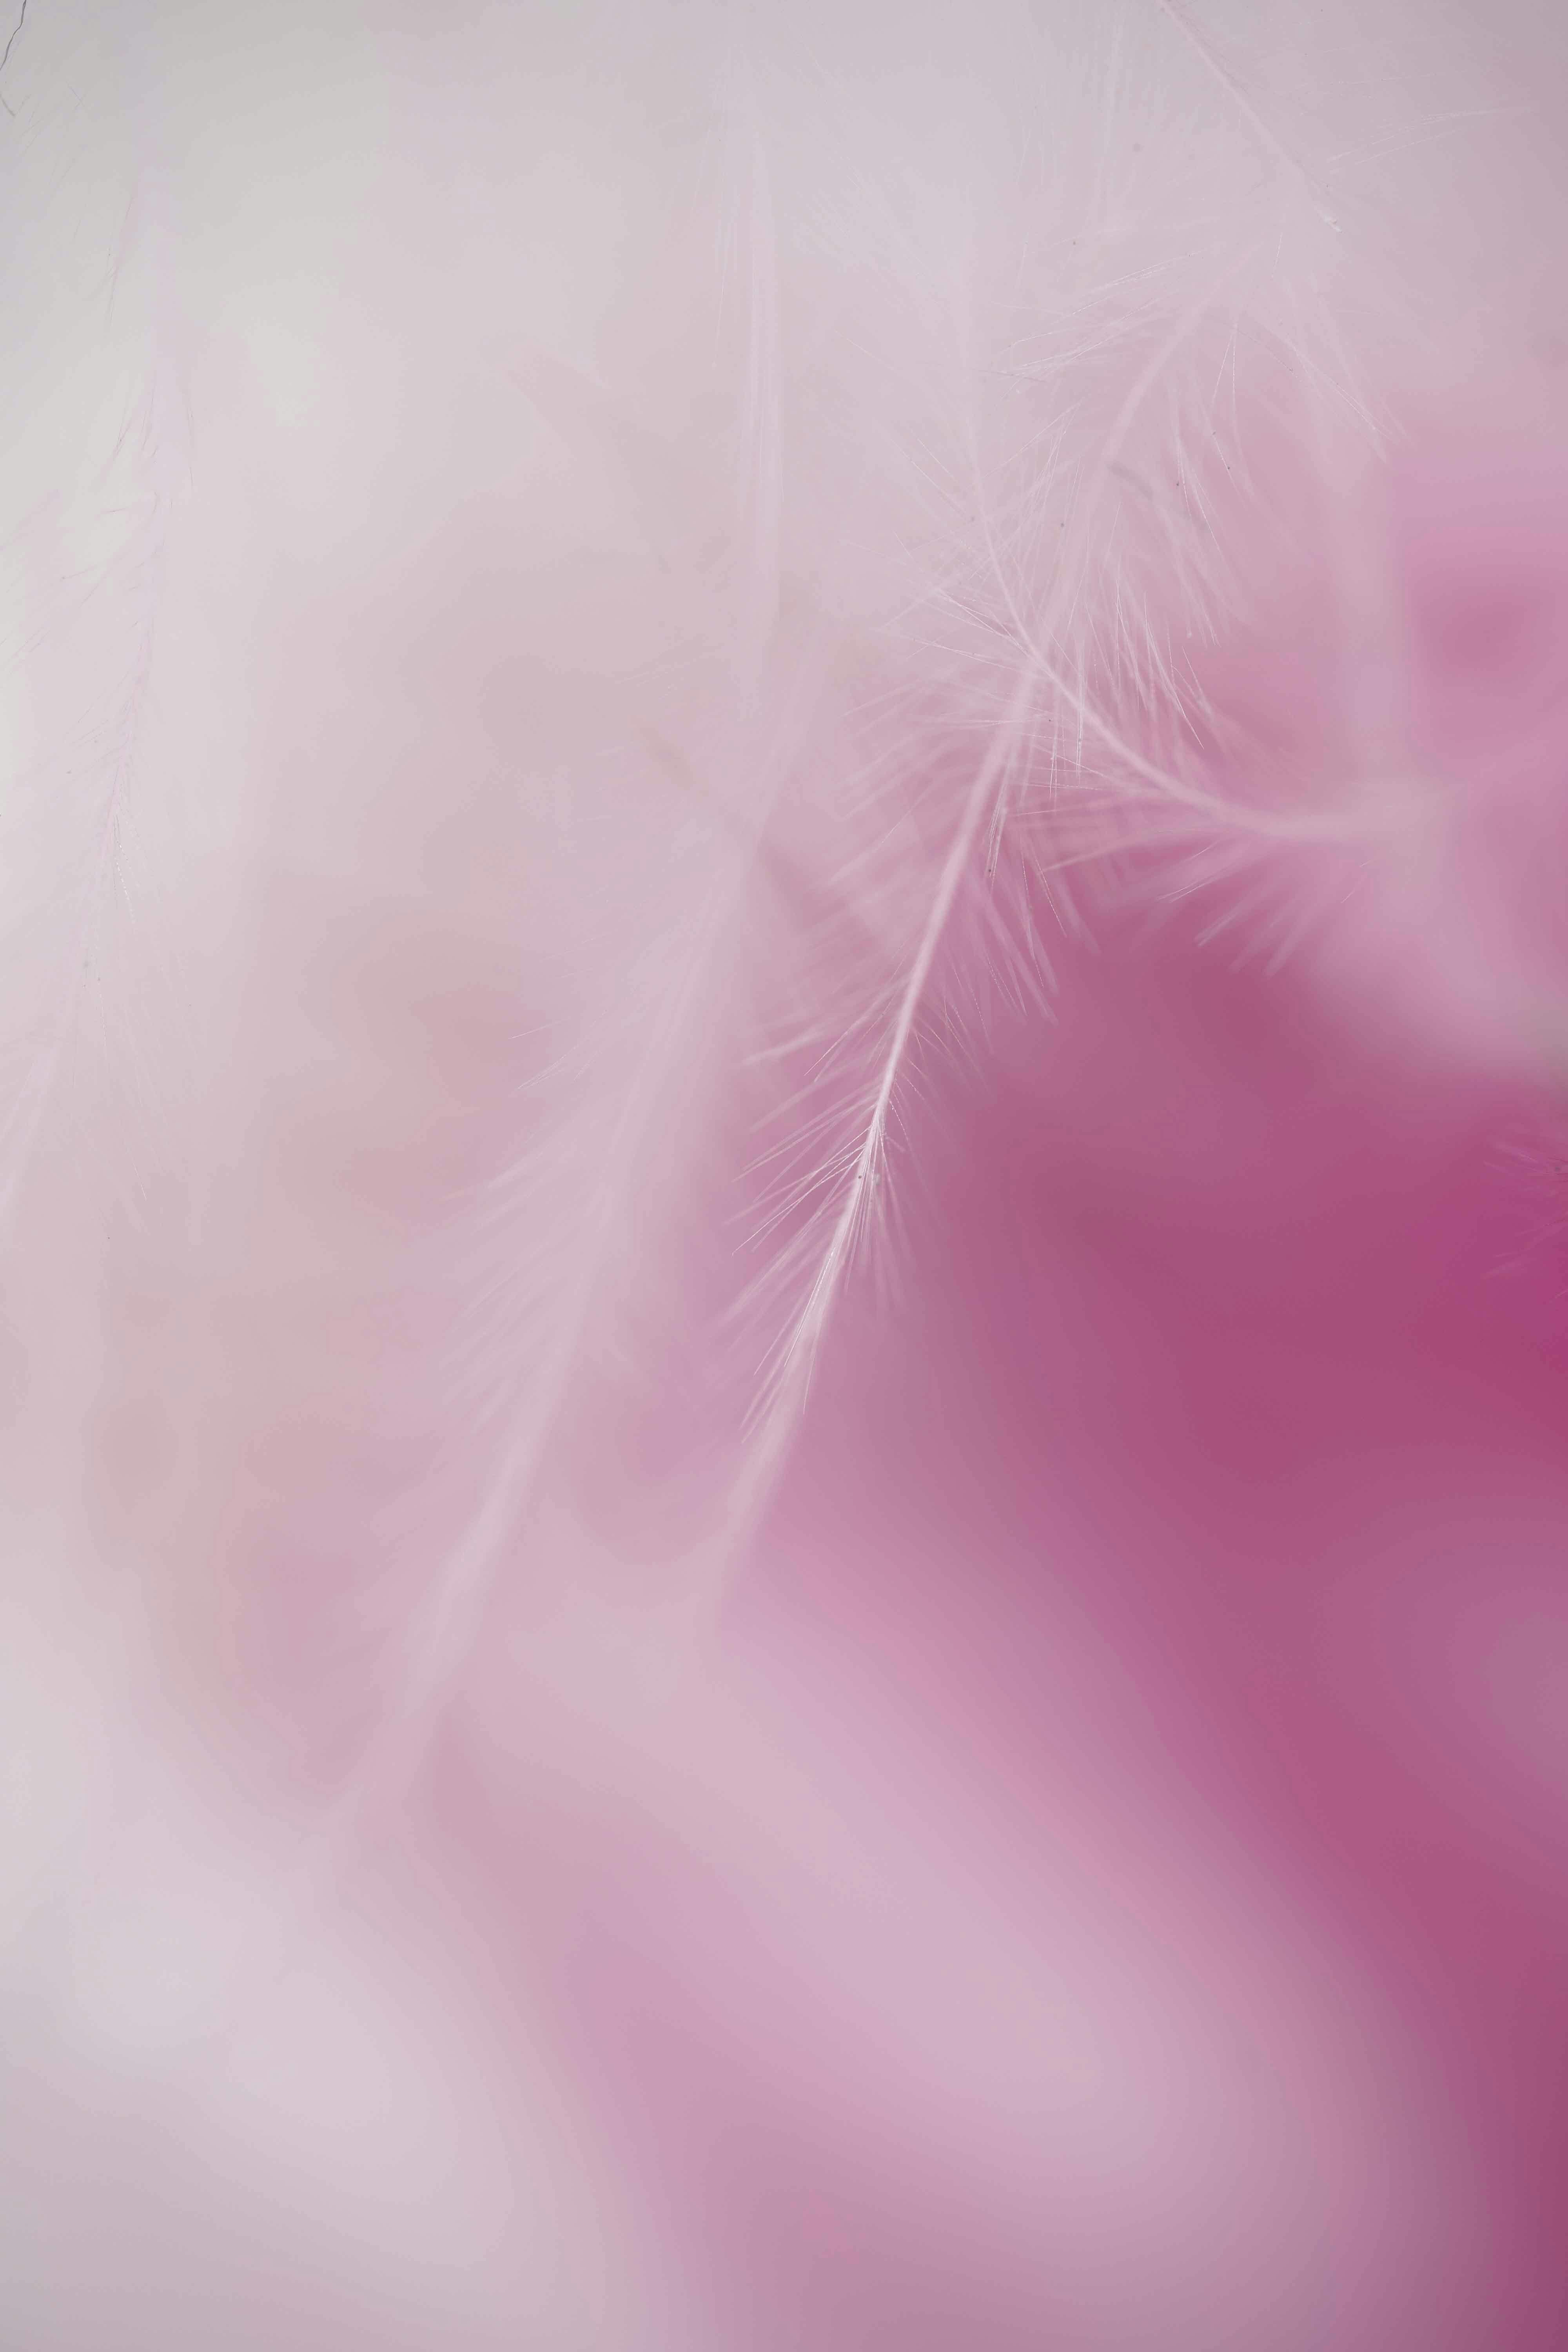 Pink Feathers Texture Wallpaper